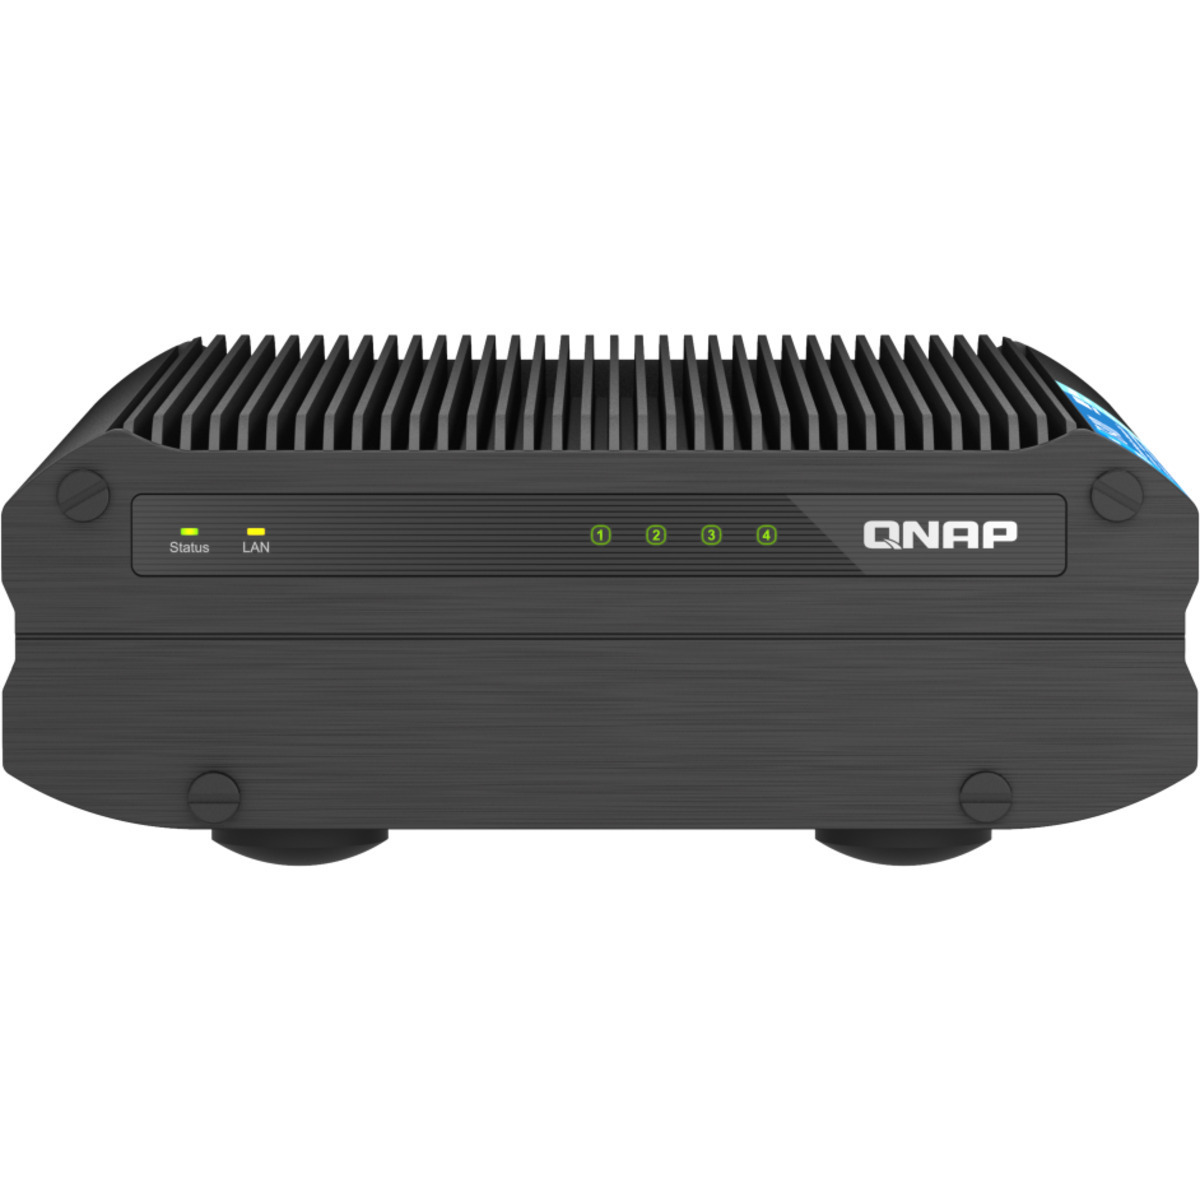 QNAP TS-i410X 12tb 4-Bay Desktop Multimedia / Power User / Business NAS - Network Attached Storage Device 3x4tb Crucial MX500 CT4000MX500SSD1 2.5 560/510MB/s SATA 6Gb/s SSD CONSUMER Class Drives Installed - Burn-In Tested TS-i410X